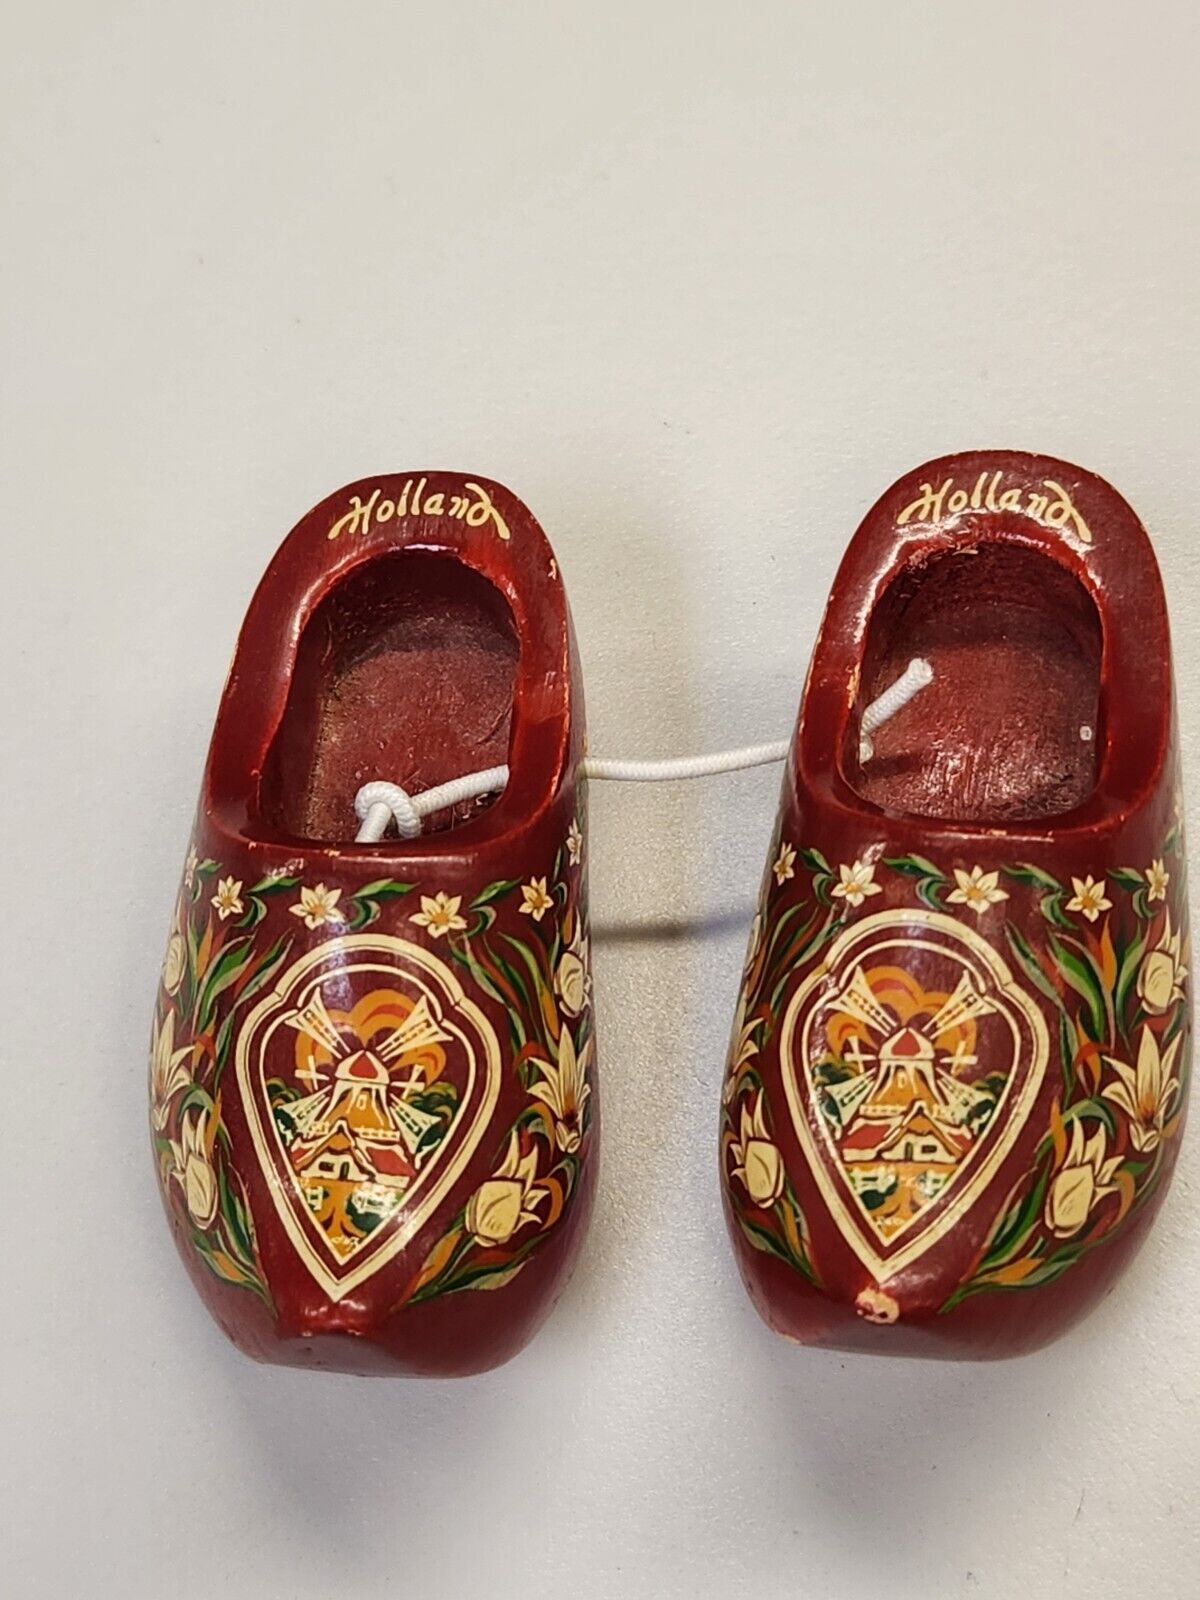 Vintage Holland Dutch Wooden Shoes Clogs Netherlands Windmill Tulip Flowers Red